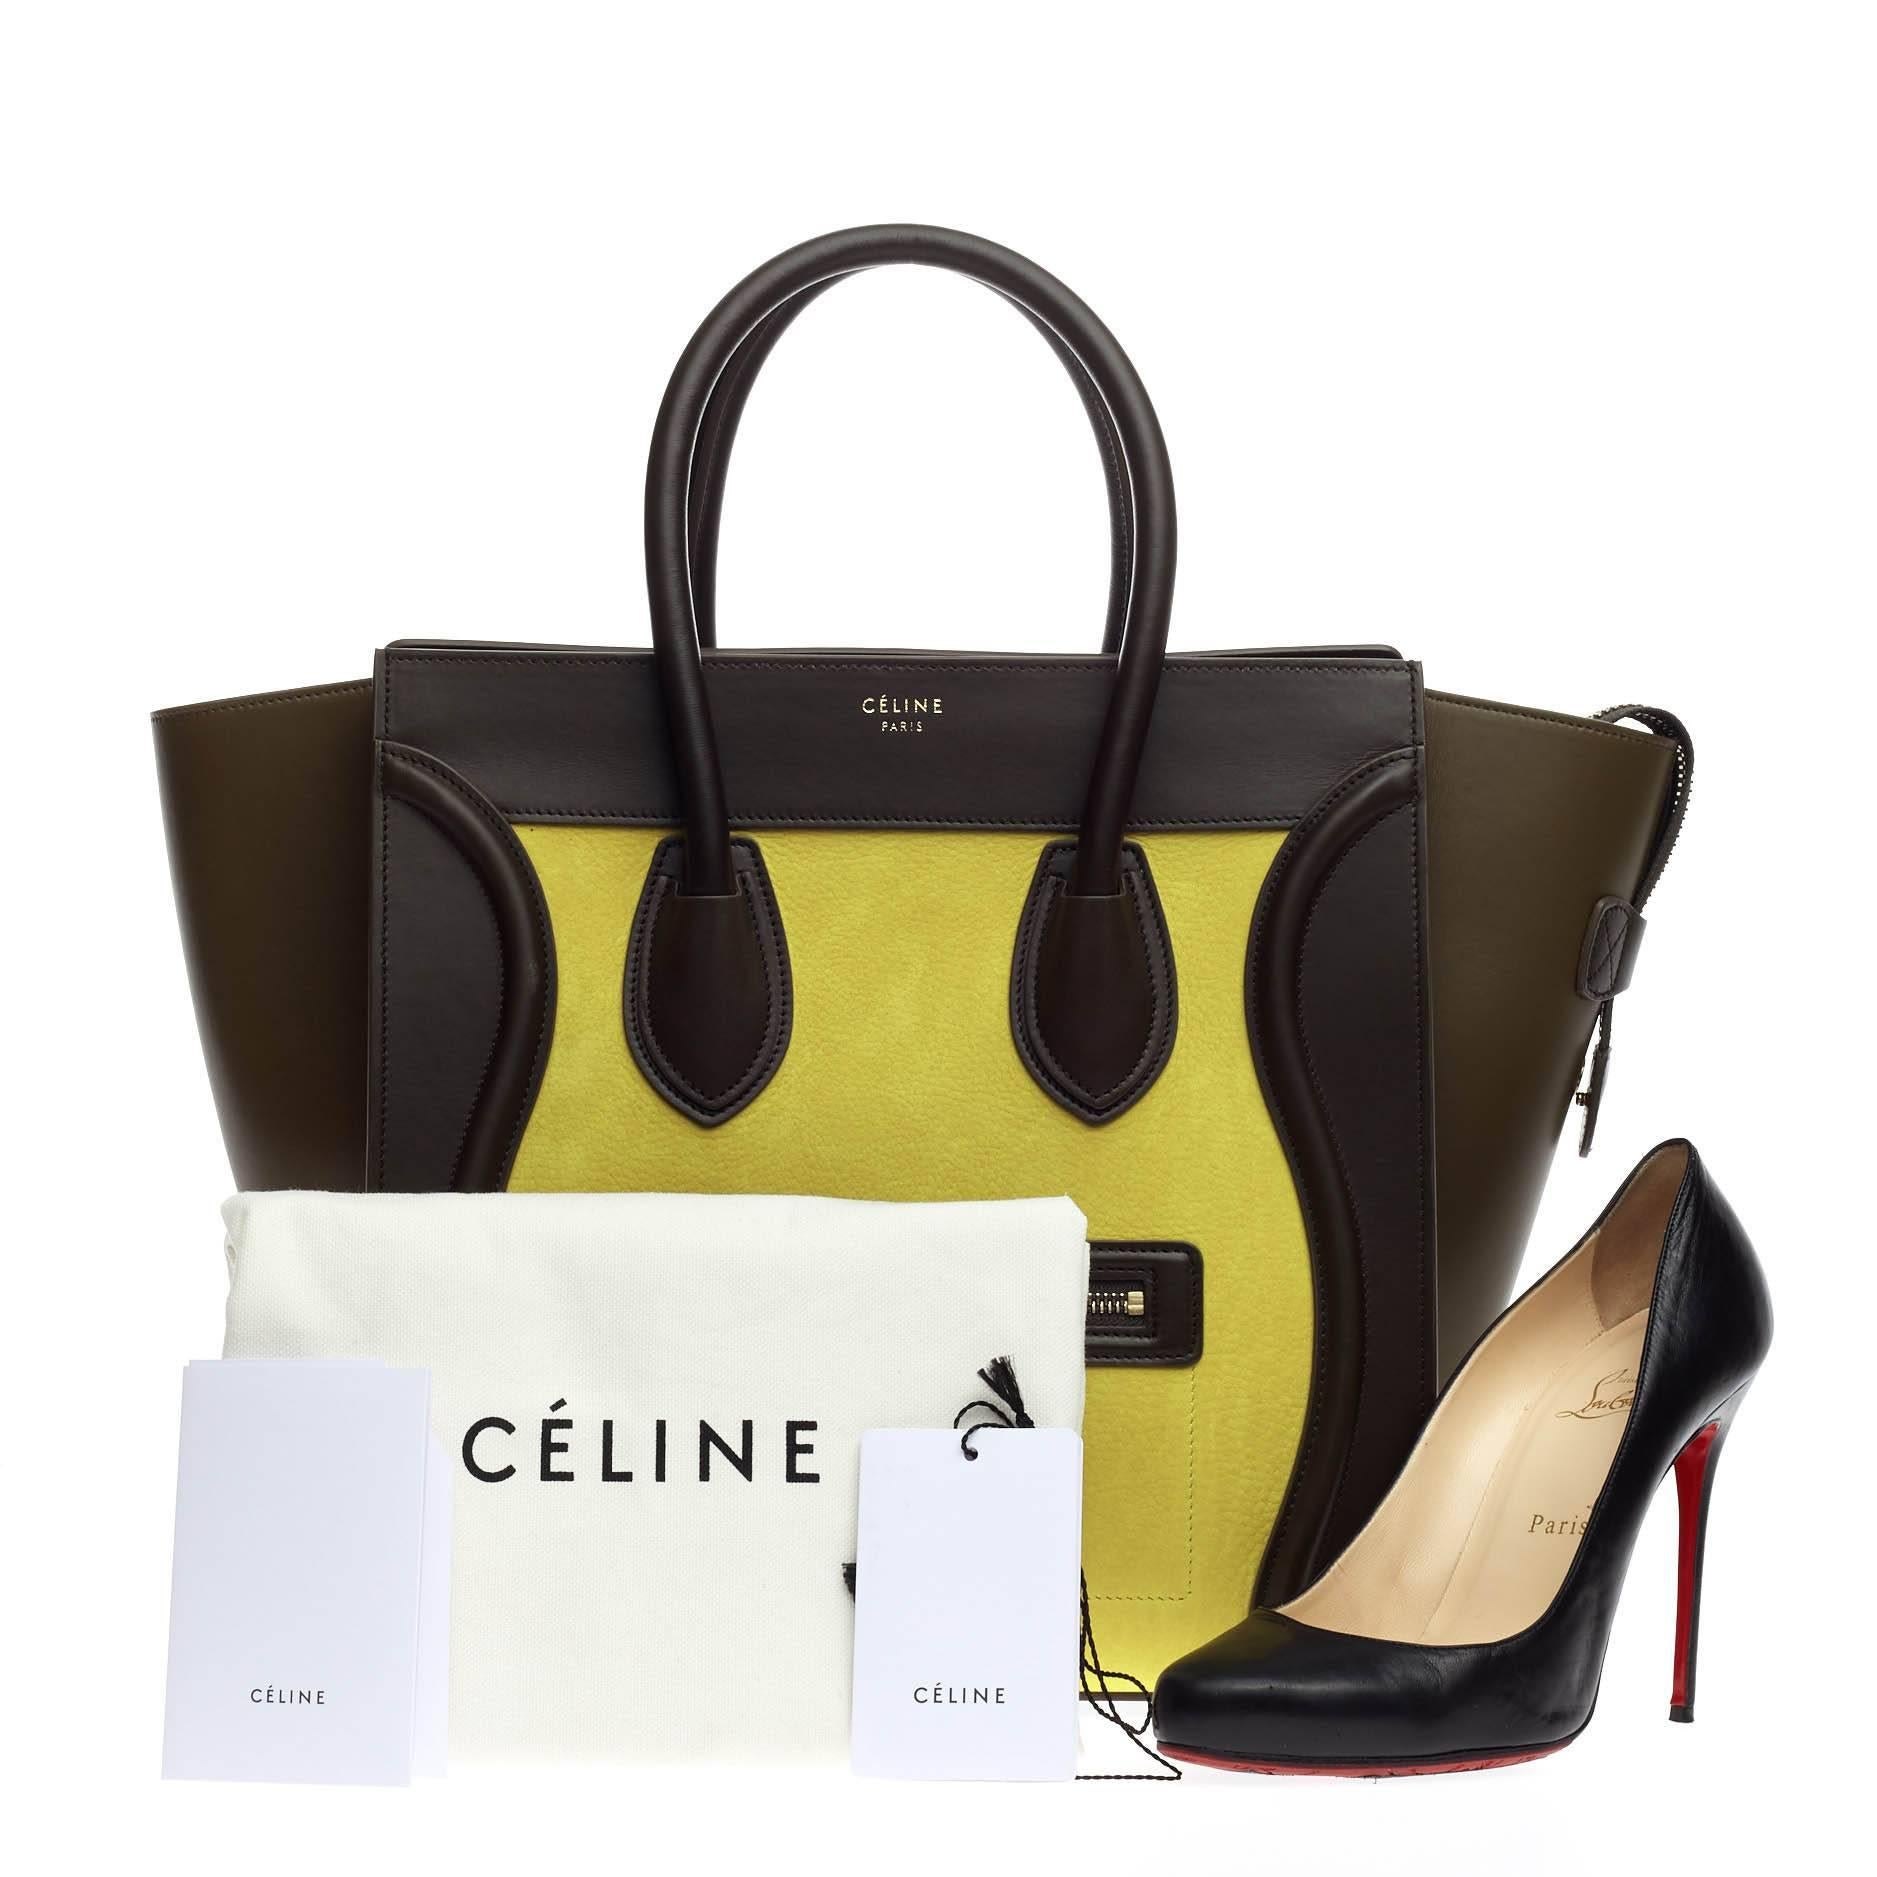 This authentic Celine Tricolor Luggage Nubuck Mini is an elegant day-to-day style essential for any fashionista. Constructed with tricolor shades of olive green calfskin wings with a bright yellow nubuck center and dark brown leather paneling, this